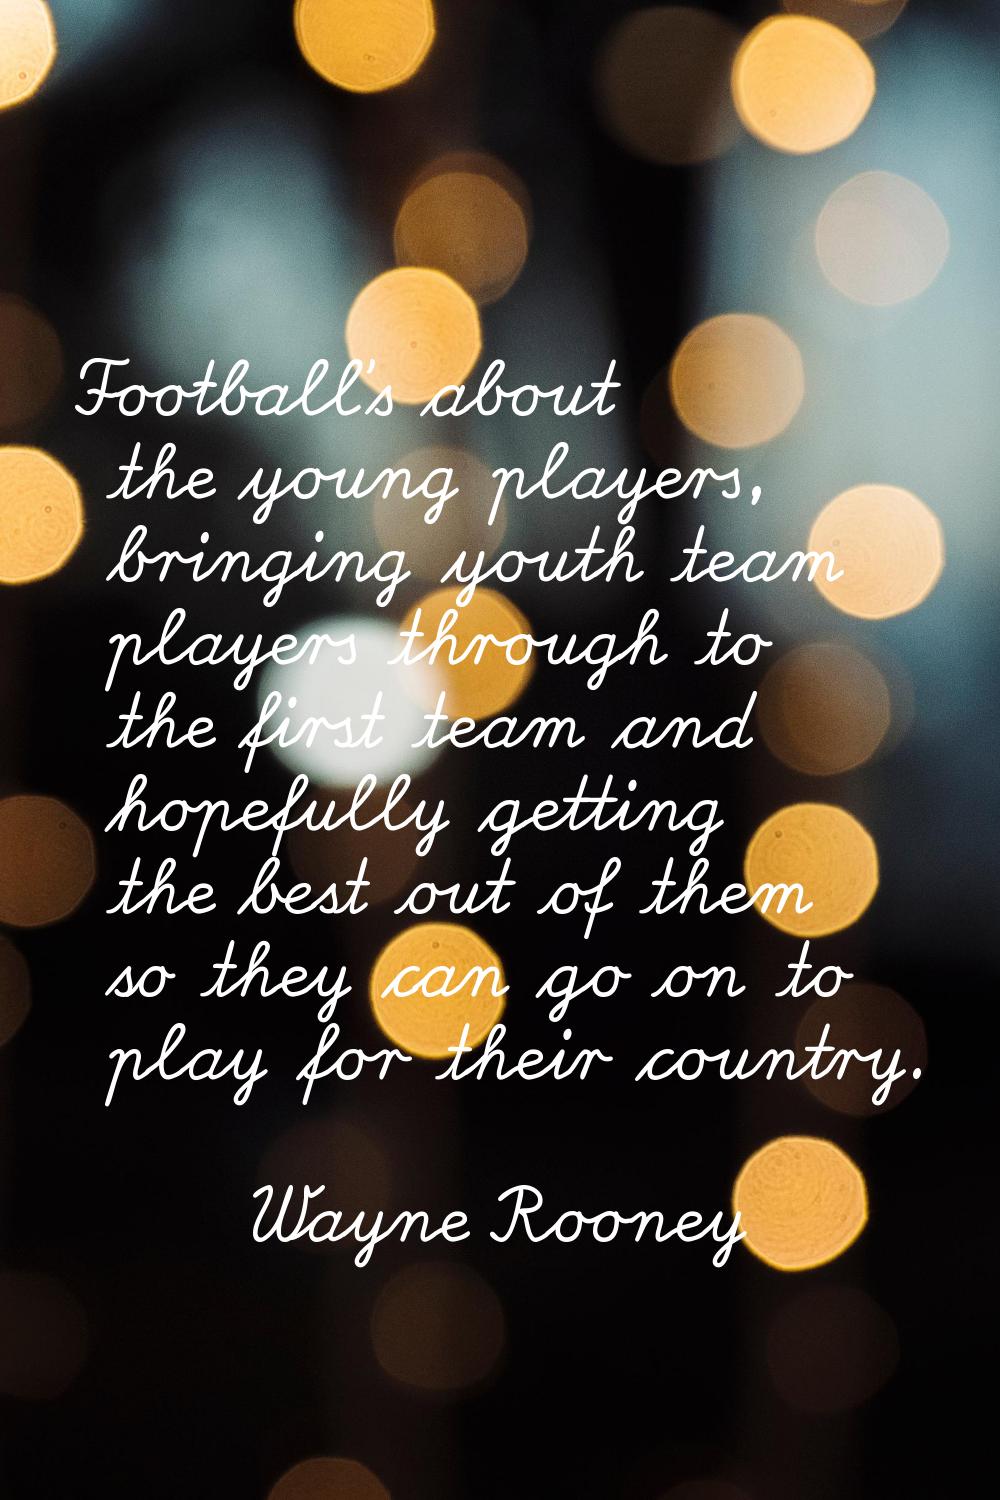 Football's about the young players, bringing youth team players through to the first team and hopef